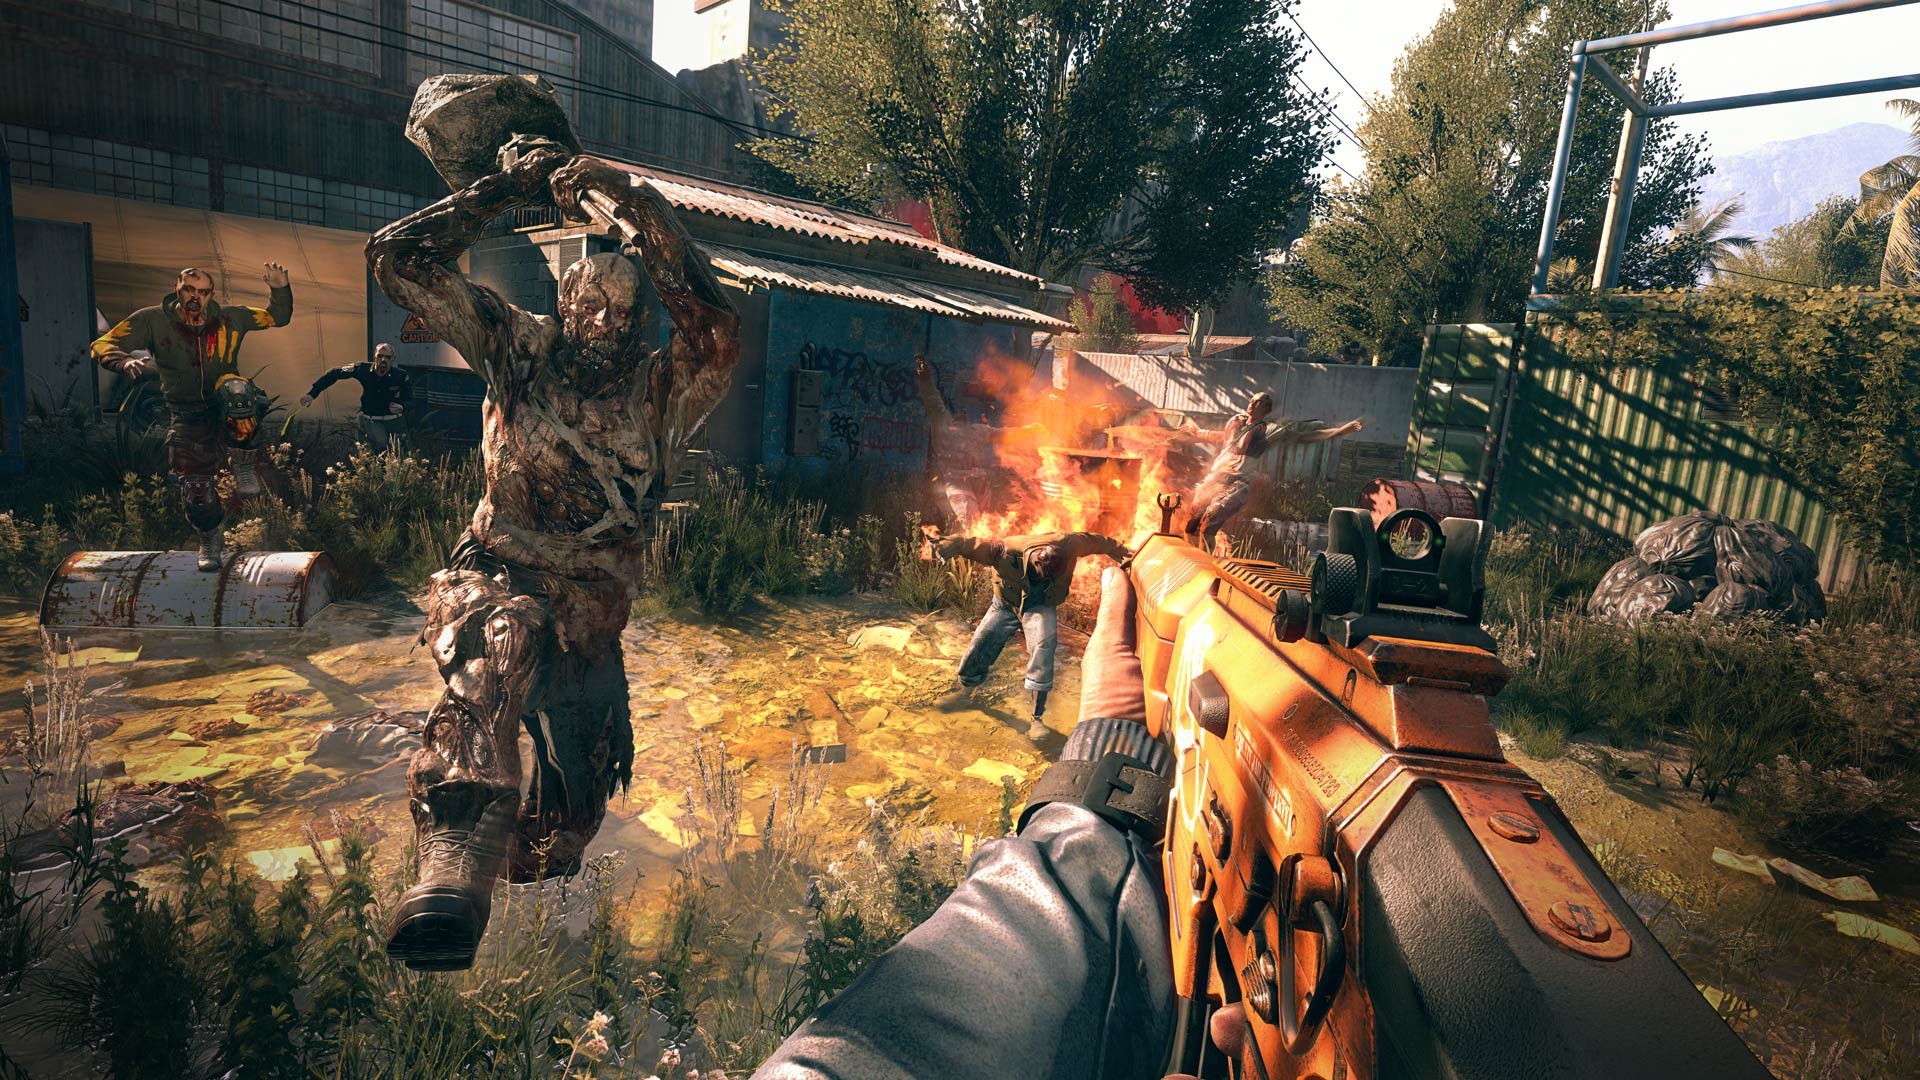 Dying Light system requirements